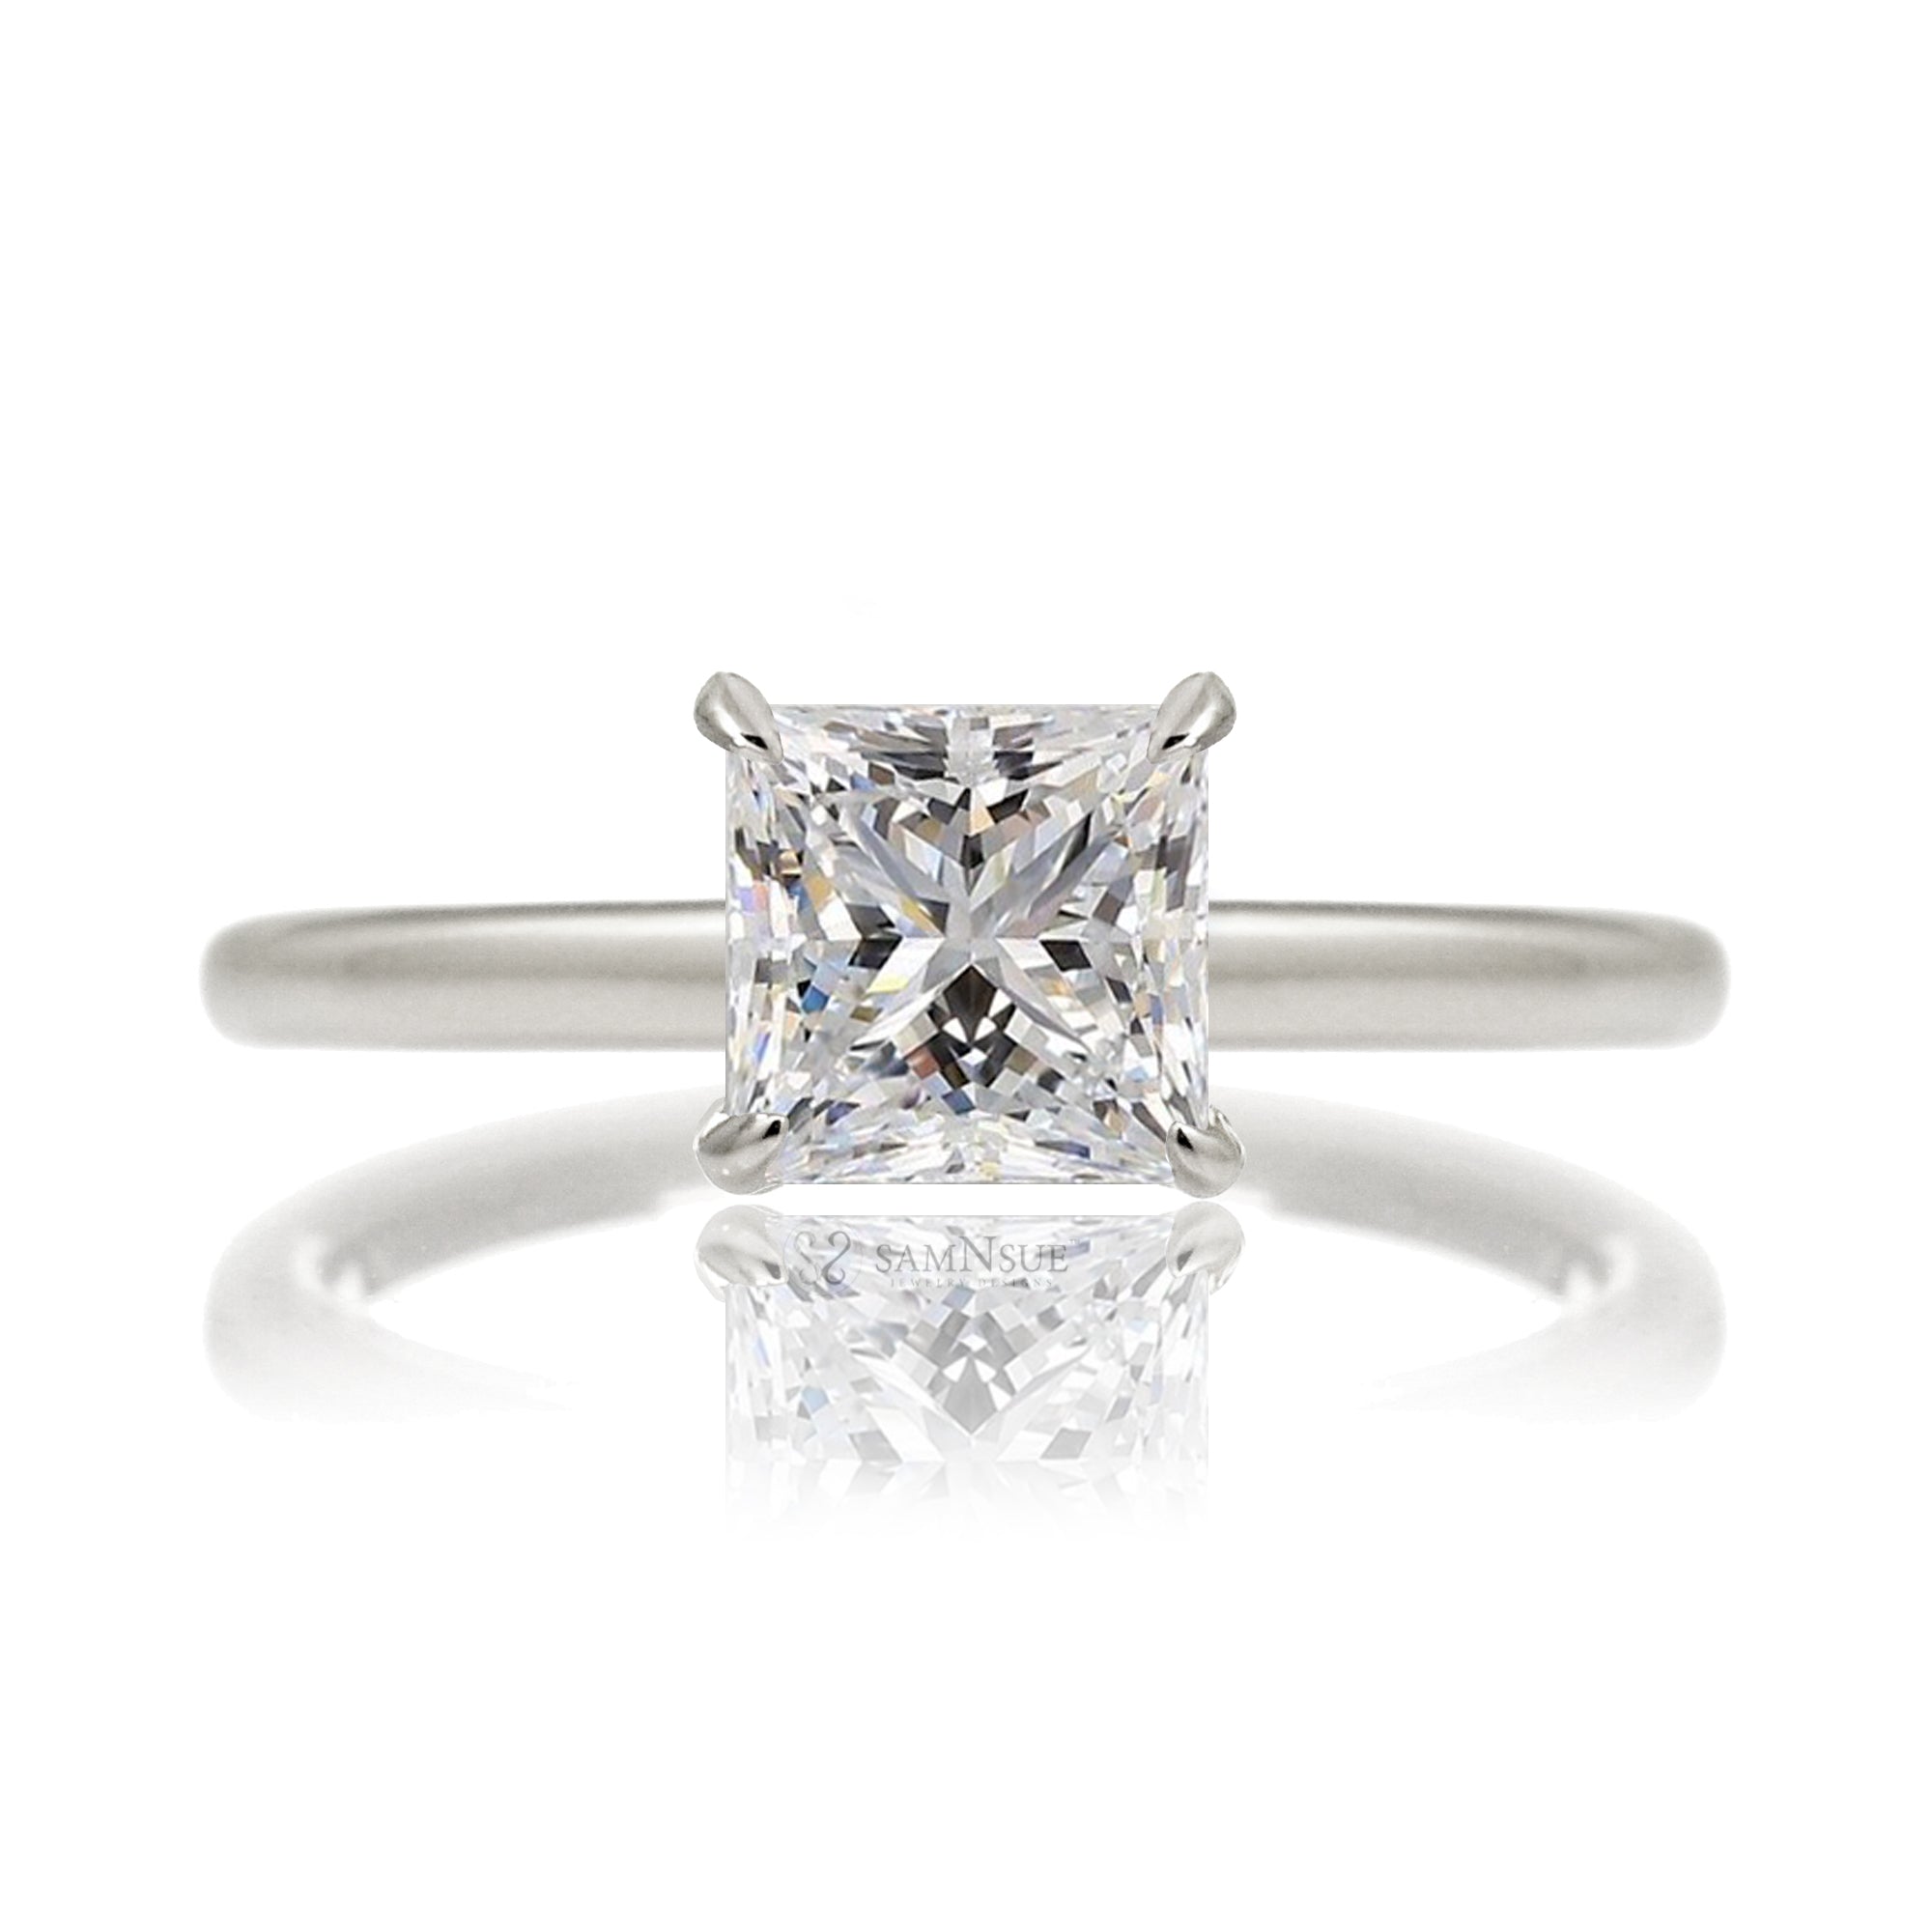 Princess cut solitaire diamond engagement ring with a hidden halo and solid polished band in white gold